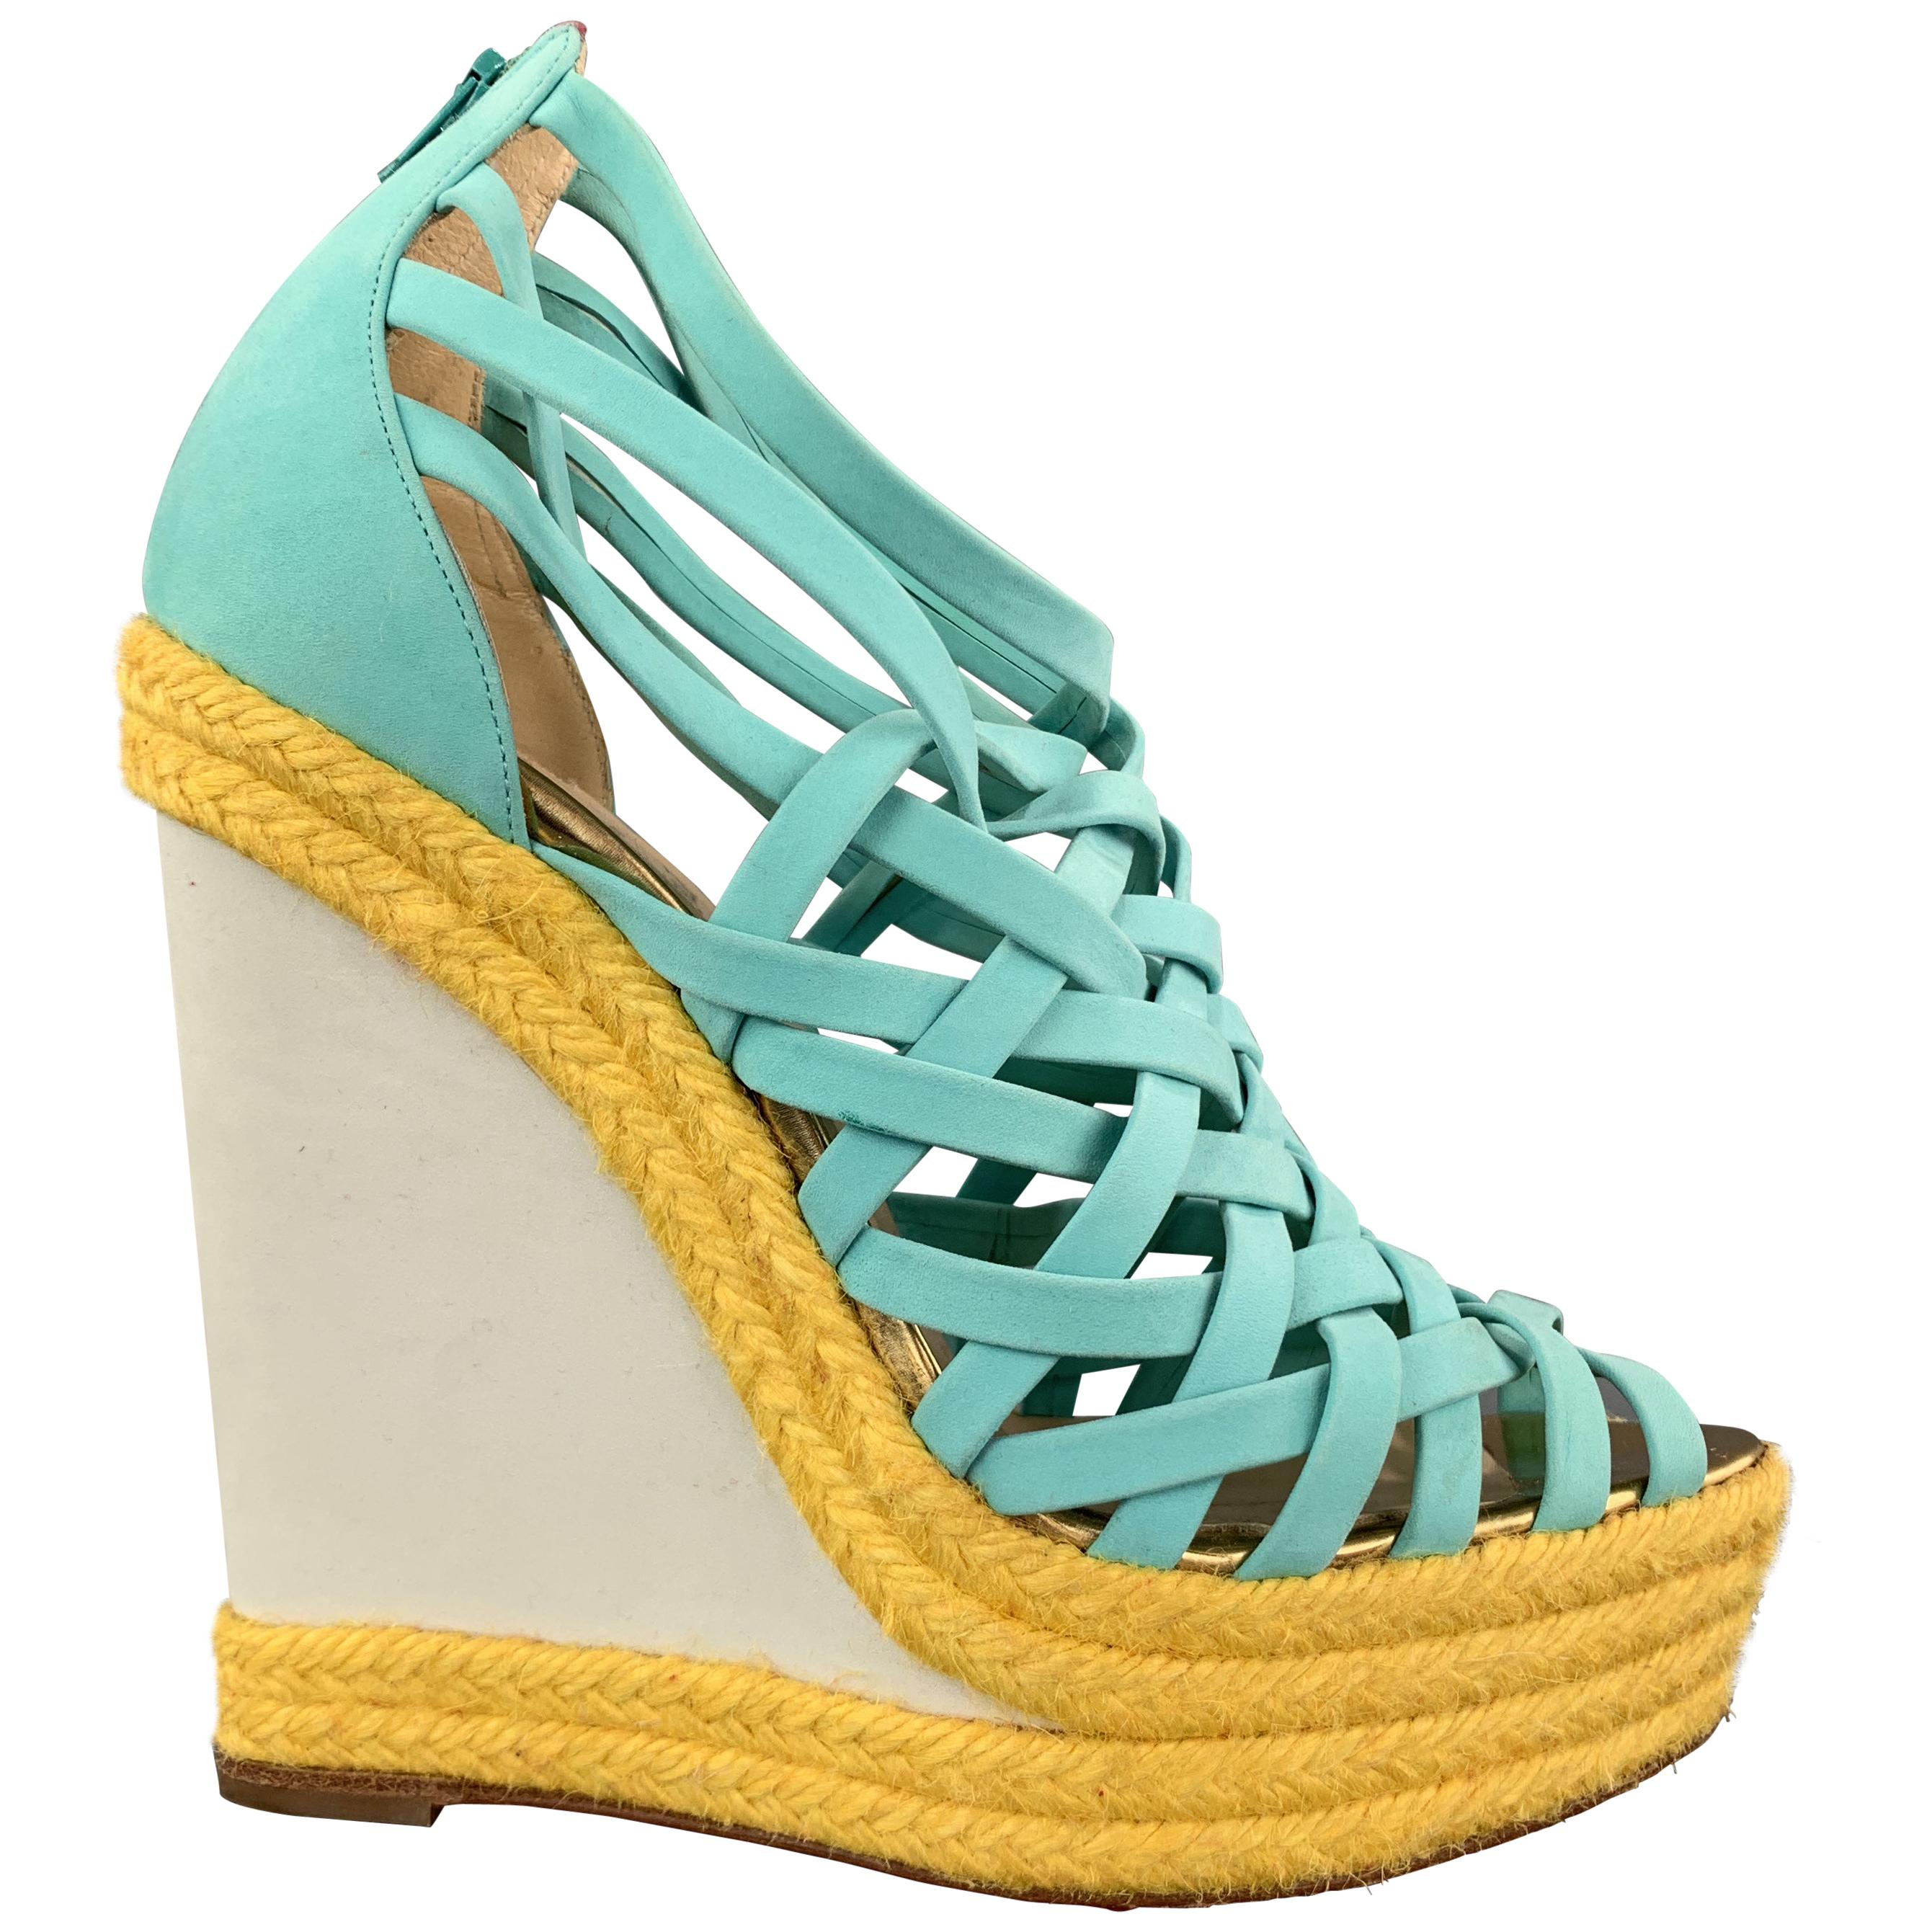 CHRISTIAN LOUBOUTIN 7 Turquoise Suede Woven Yellow Braided Platform Wedge Sandal